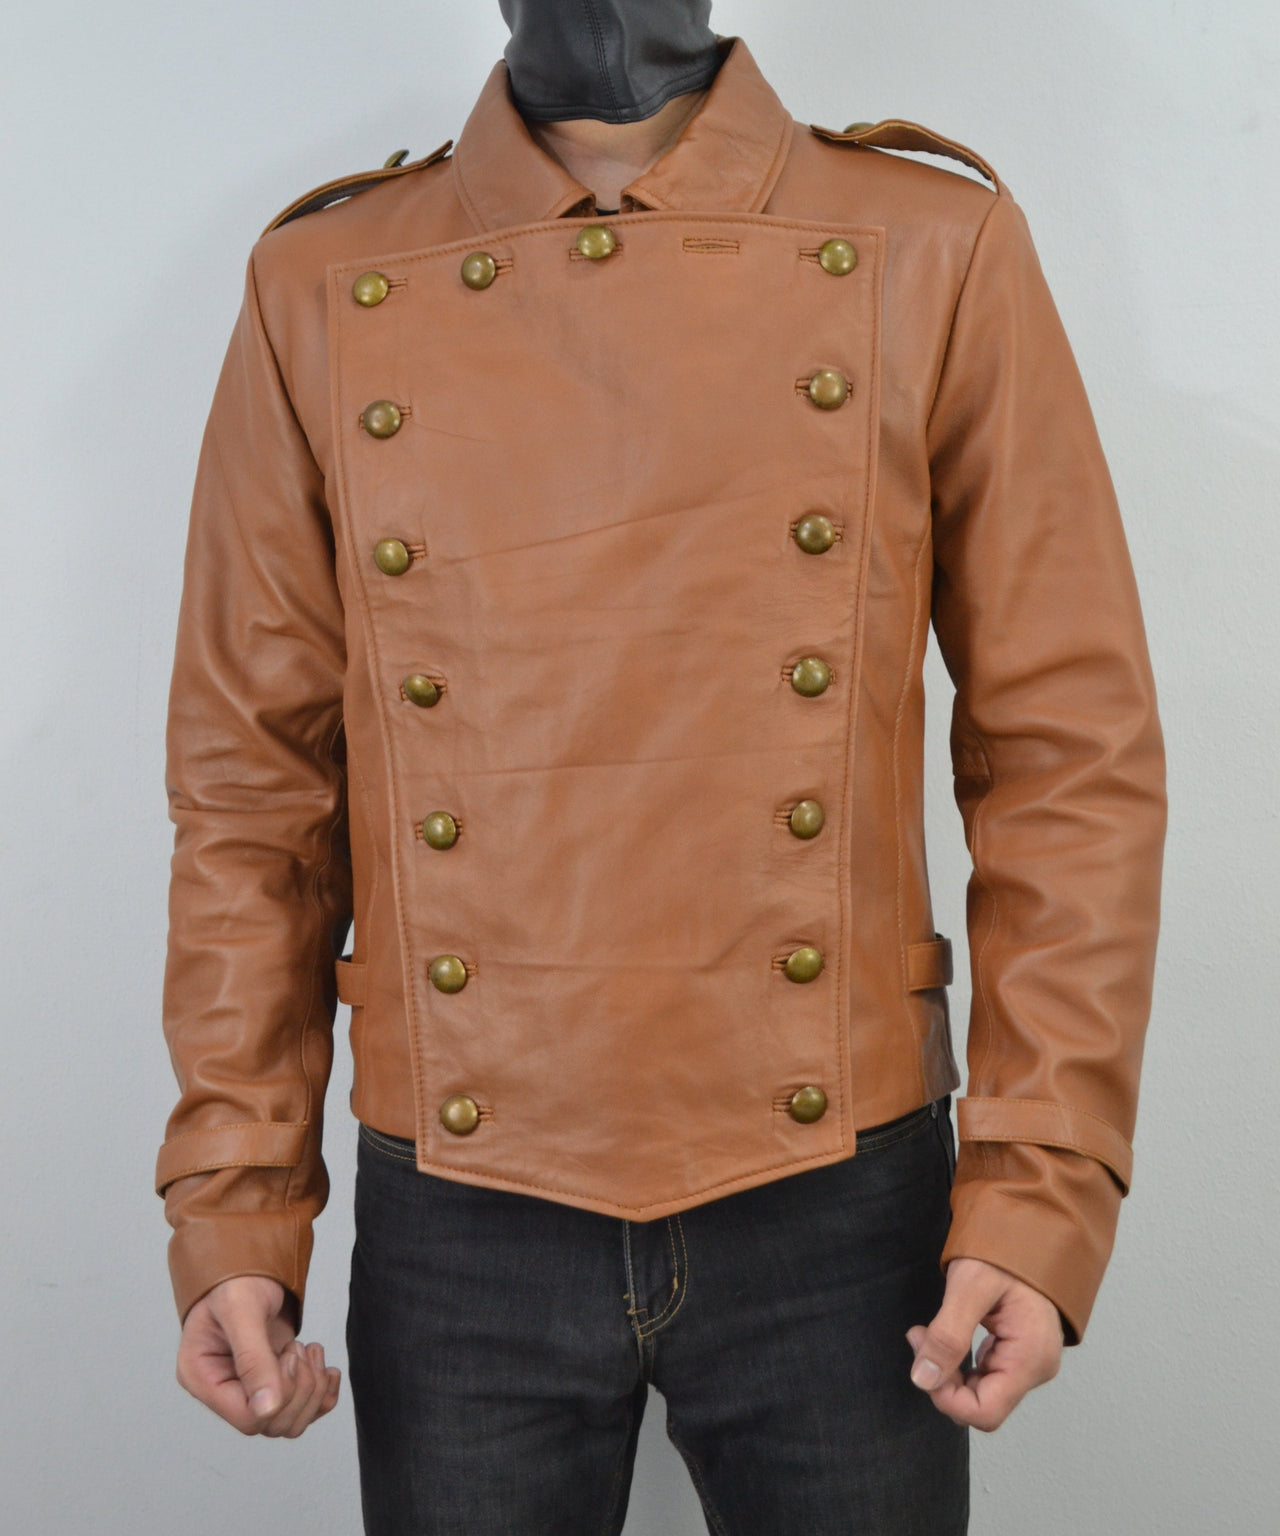 The Rocketeer Billy Campbell Brown V-Shaped Leather Jacket